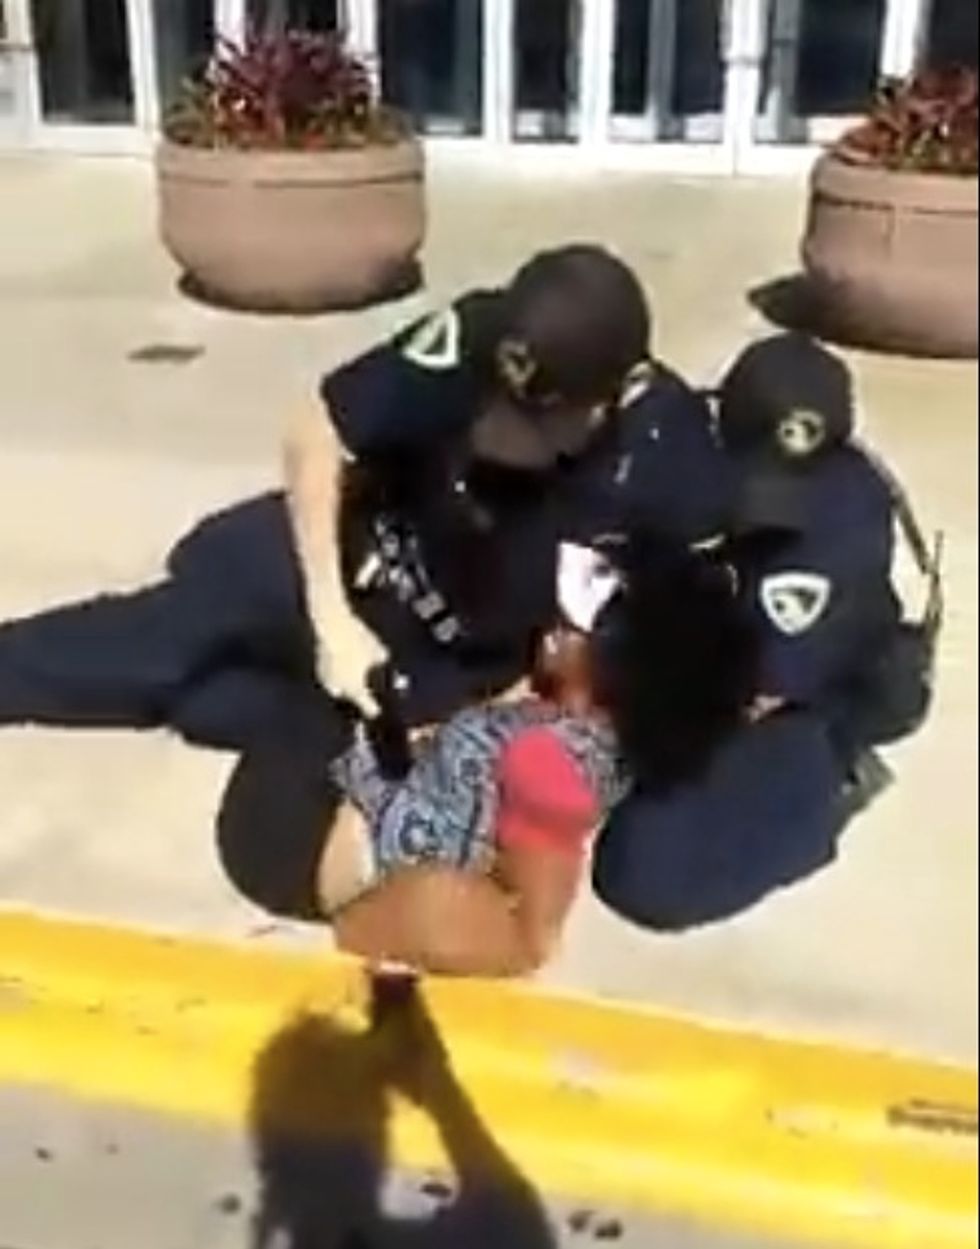 Viral Video Shows White Officers Violently Arresting 18-Year-Old Black Woman — but Clip Doesn't Tell Complete Story